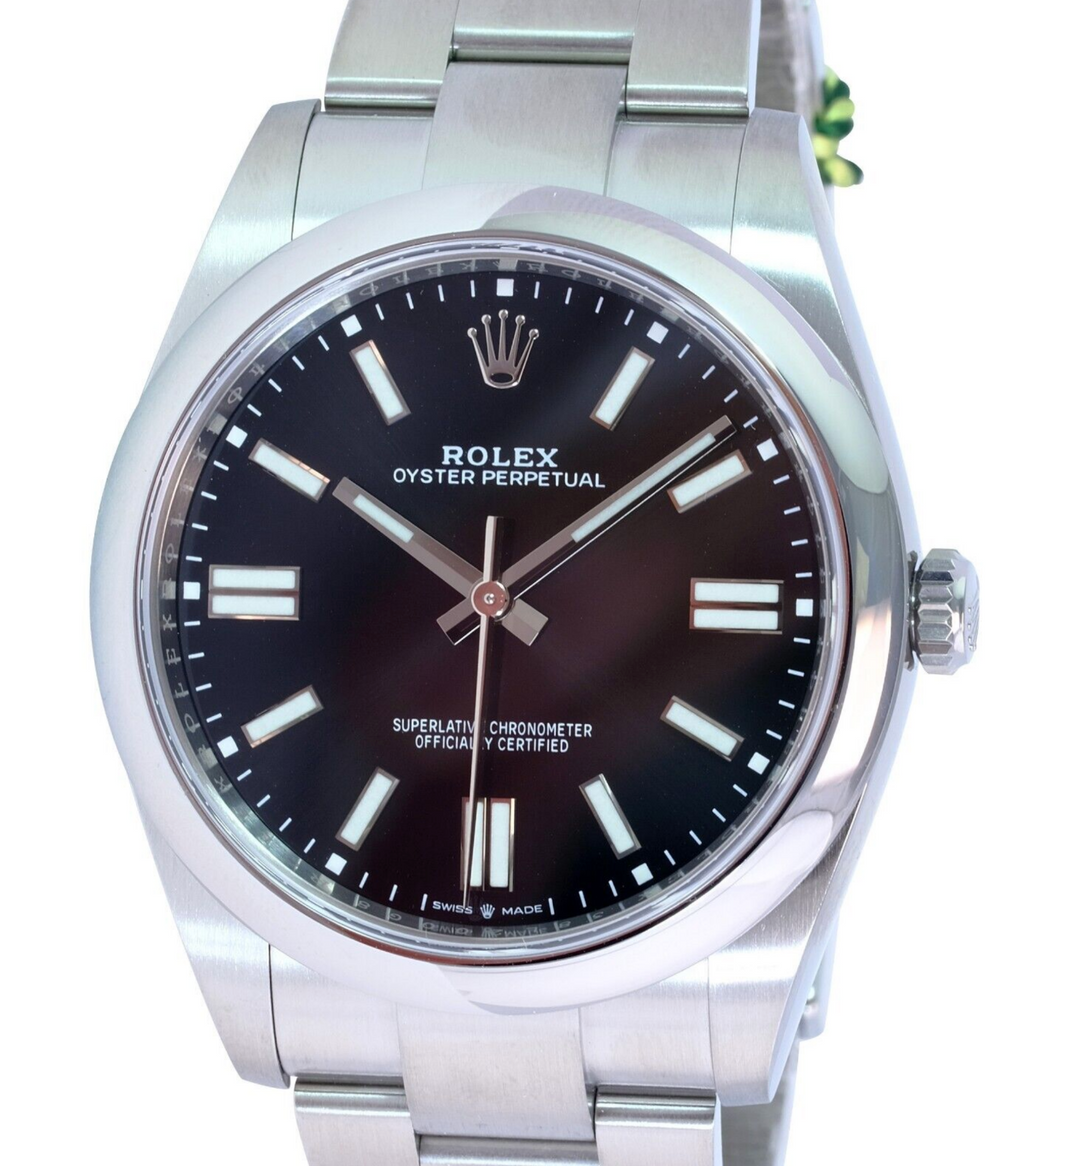 Rolex Men's Oyster Perpetual Stainless Steel Black Dial Domed 41mm Watch - New - luxuriantconcierge